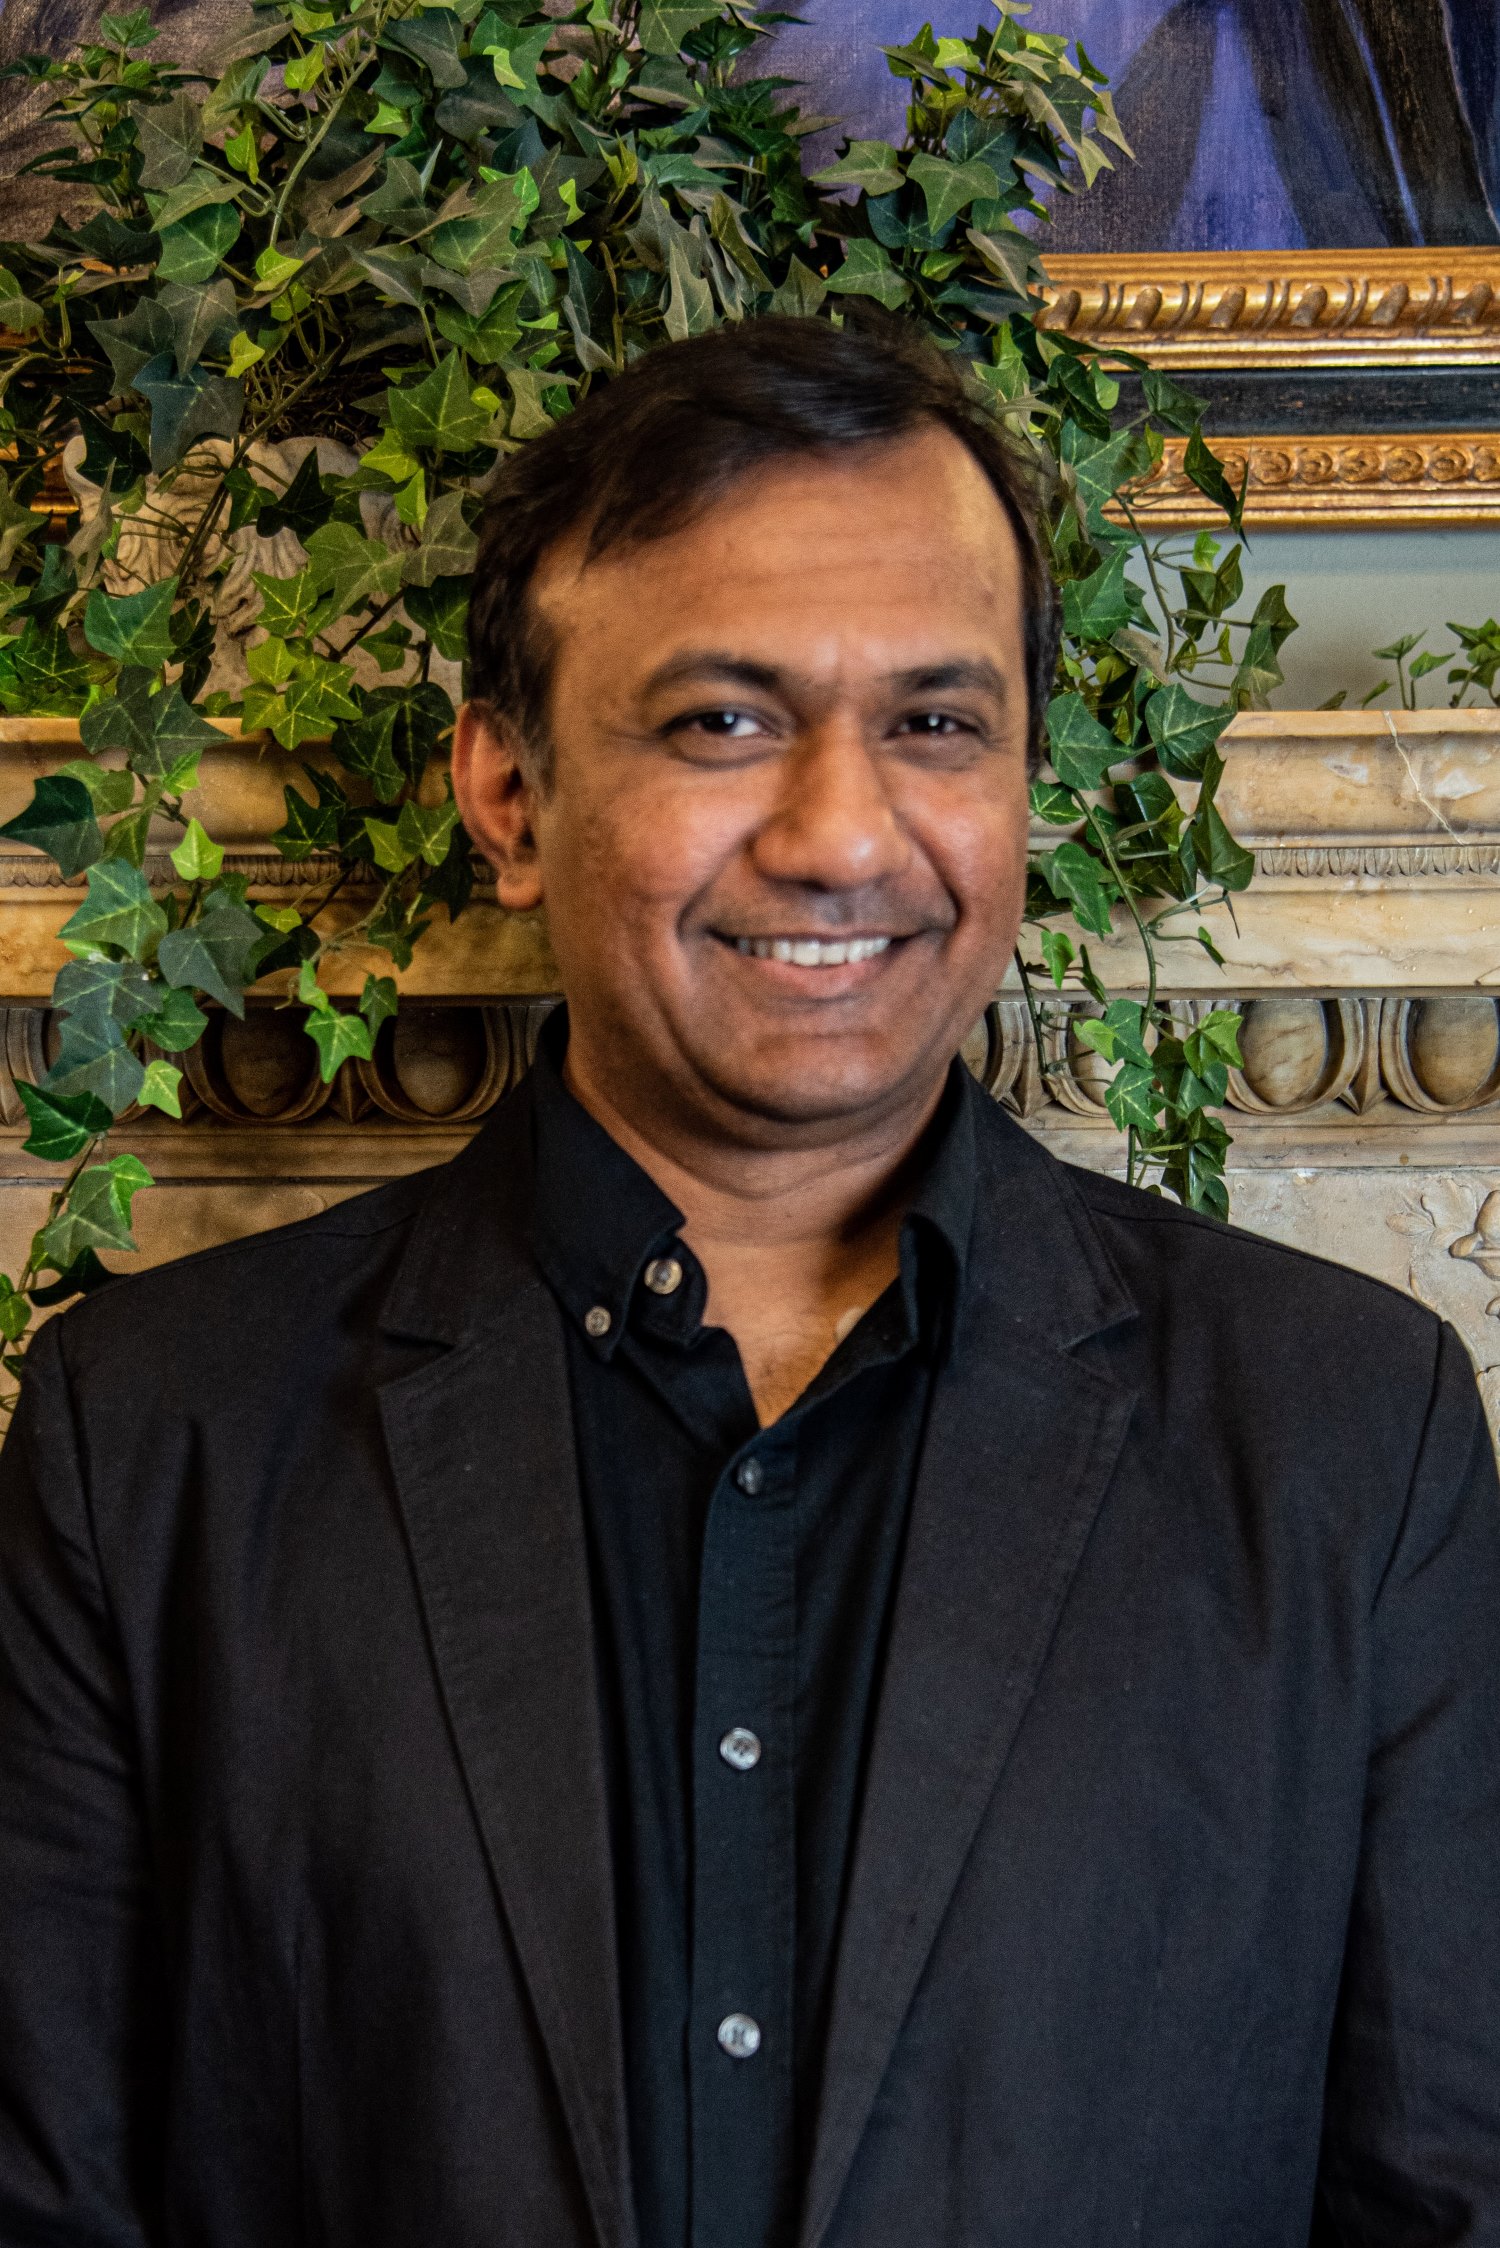 Masudul Biswas, Professor and Chair of the Department of Communication and Media at Loyola University Maryland